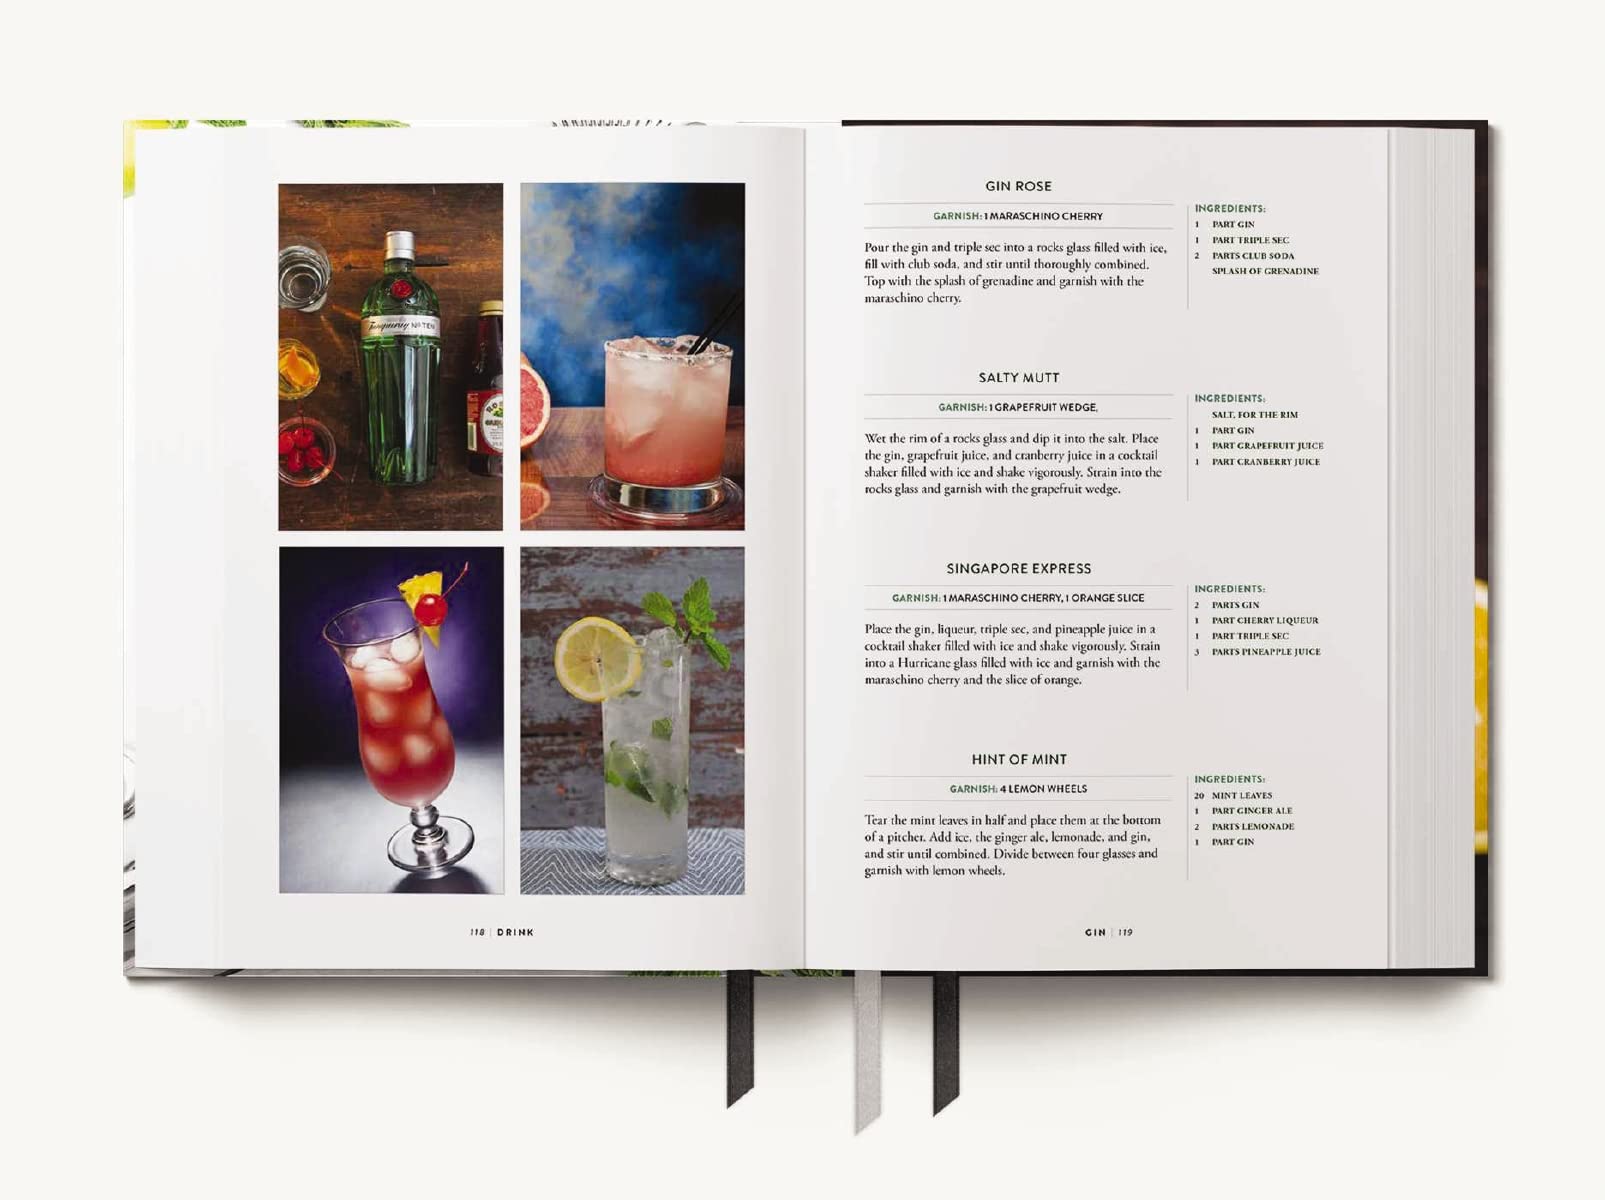 Drink: Featuring Over 1,100 Cocktail, Wine, and Spirits Recipes (History of Cocktails, Big Cocktail Book, Home Bartender Gifts, The Bar Book, Wine and ... for Home Mixologists) (Ultimate Cookbooks)